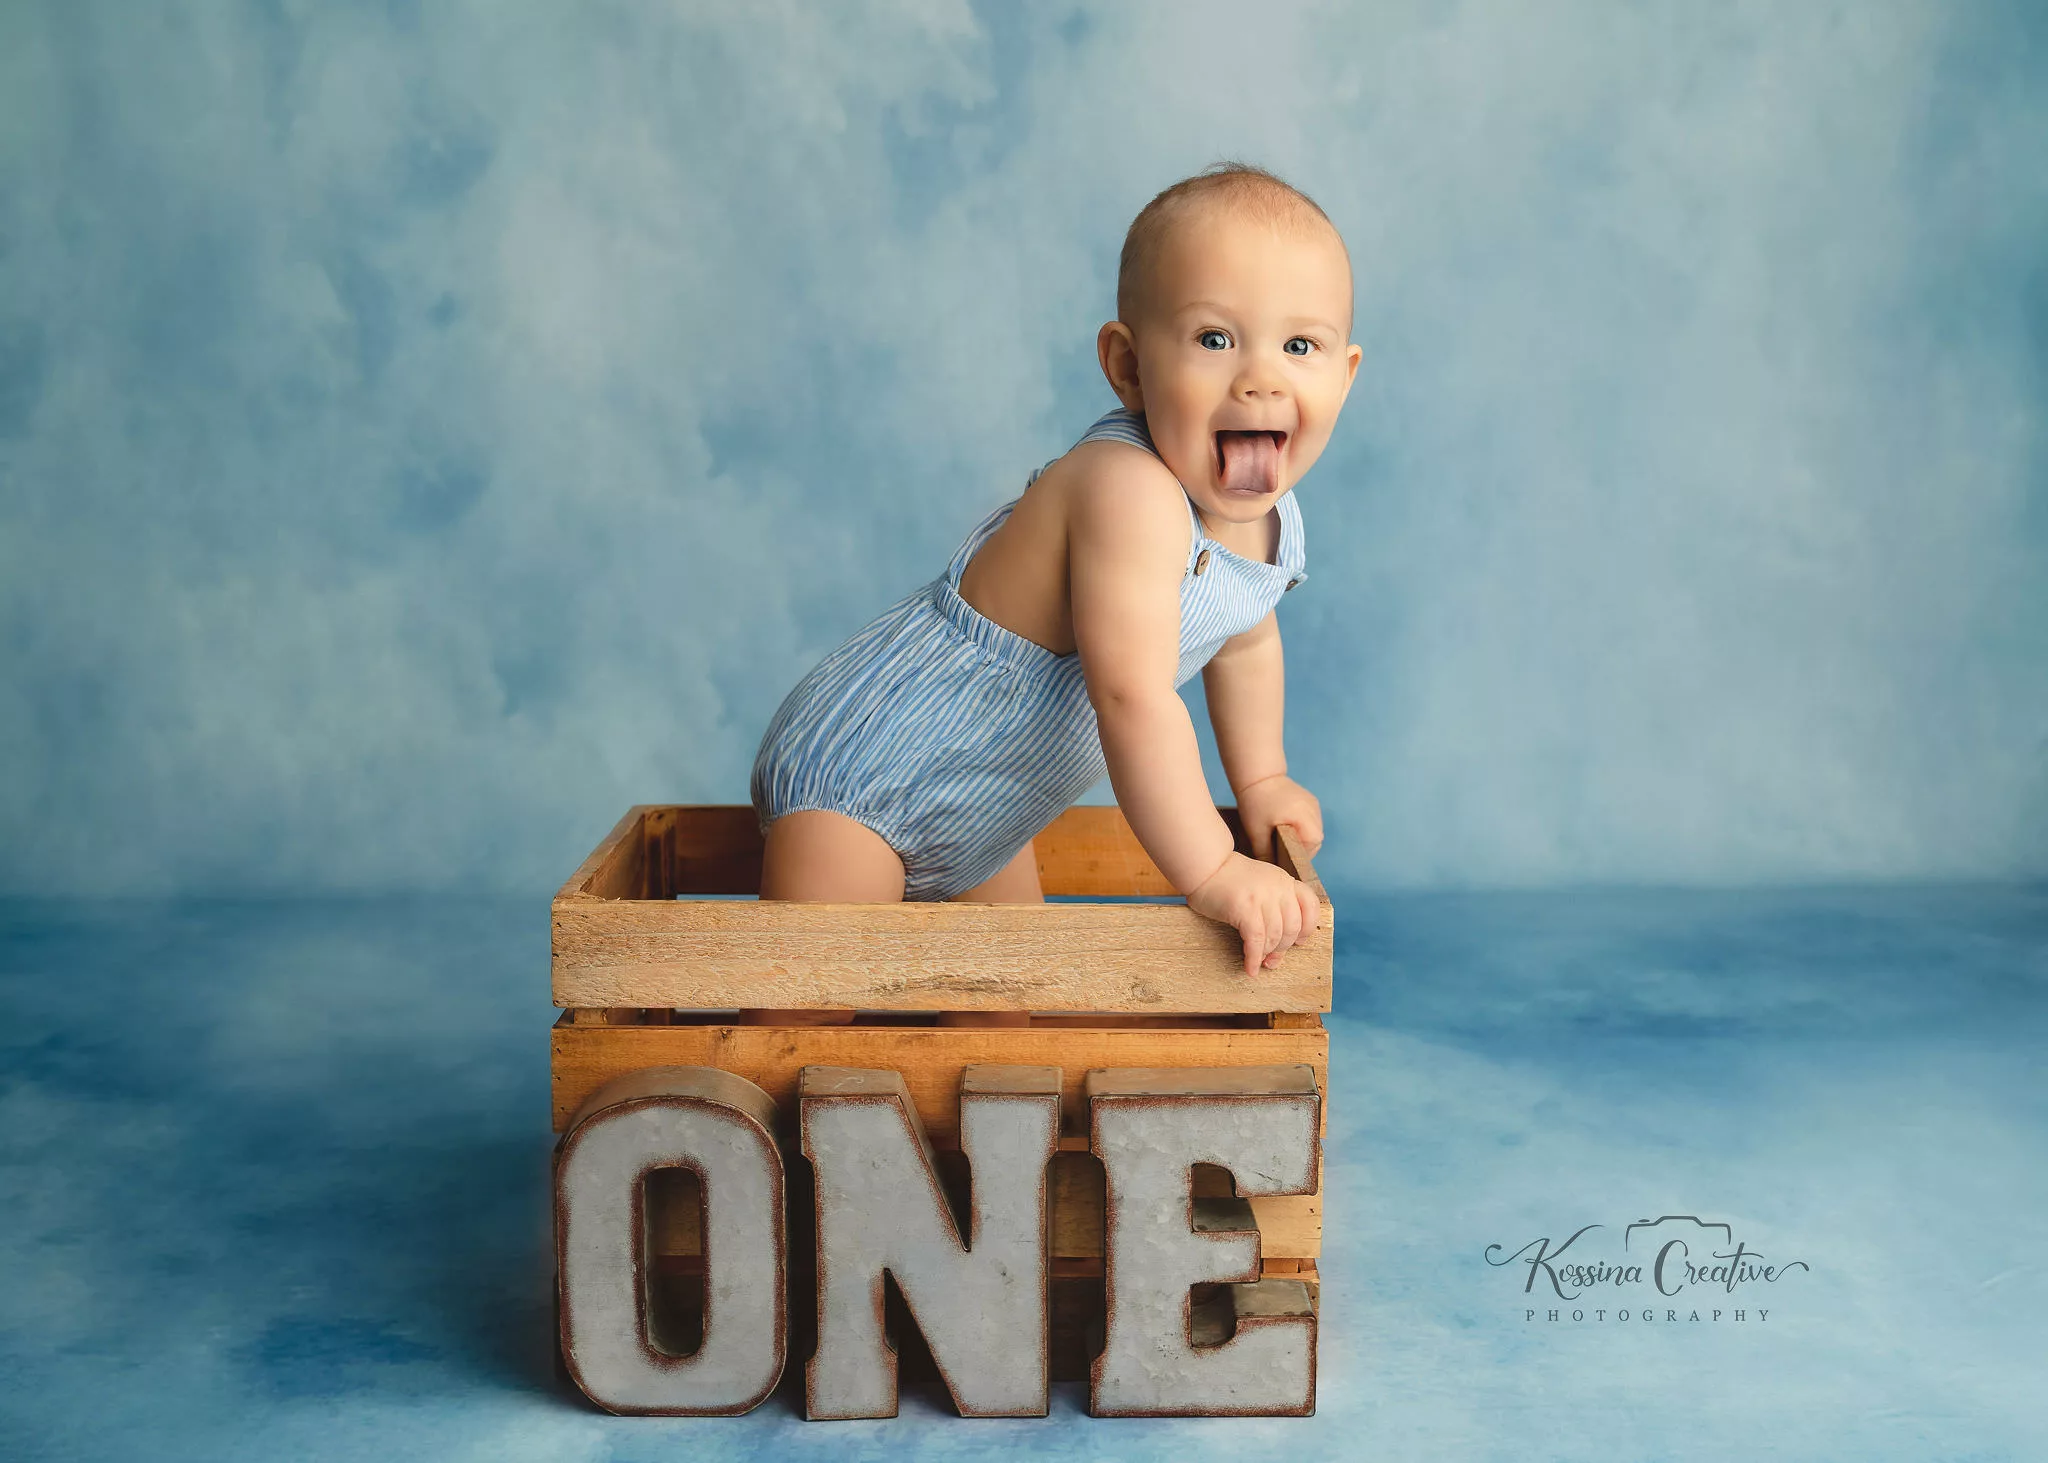 Orlando Boy Cake Smash 1st Birthday Photographer Photo Studio water color blue background one letters baby standing in crate tongue out